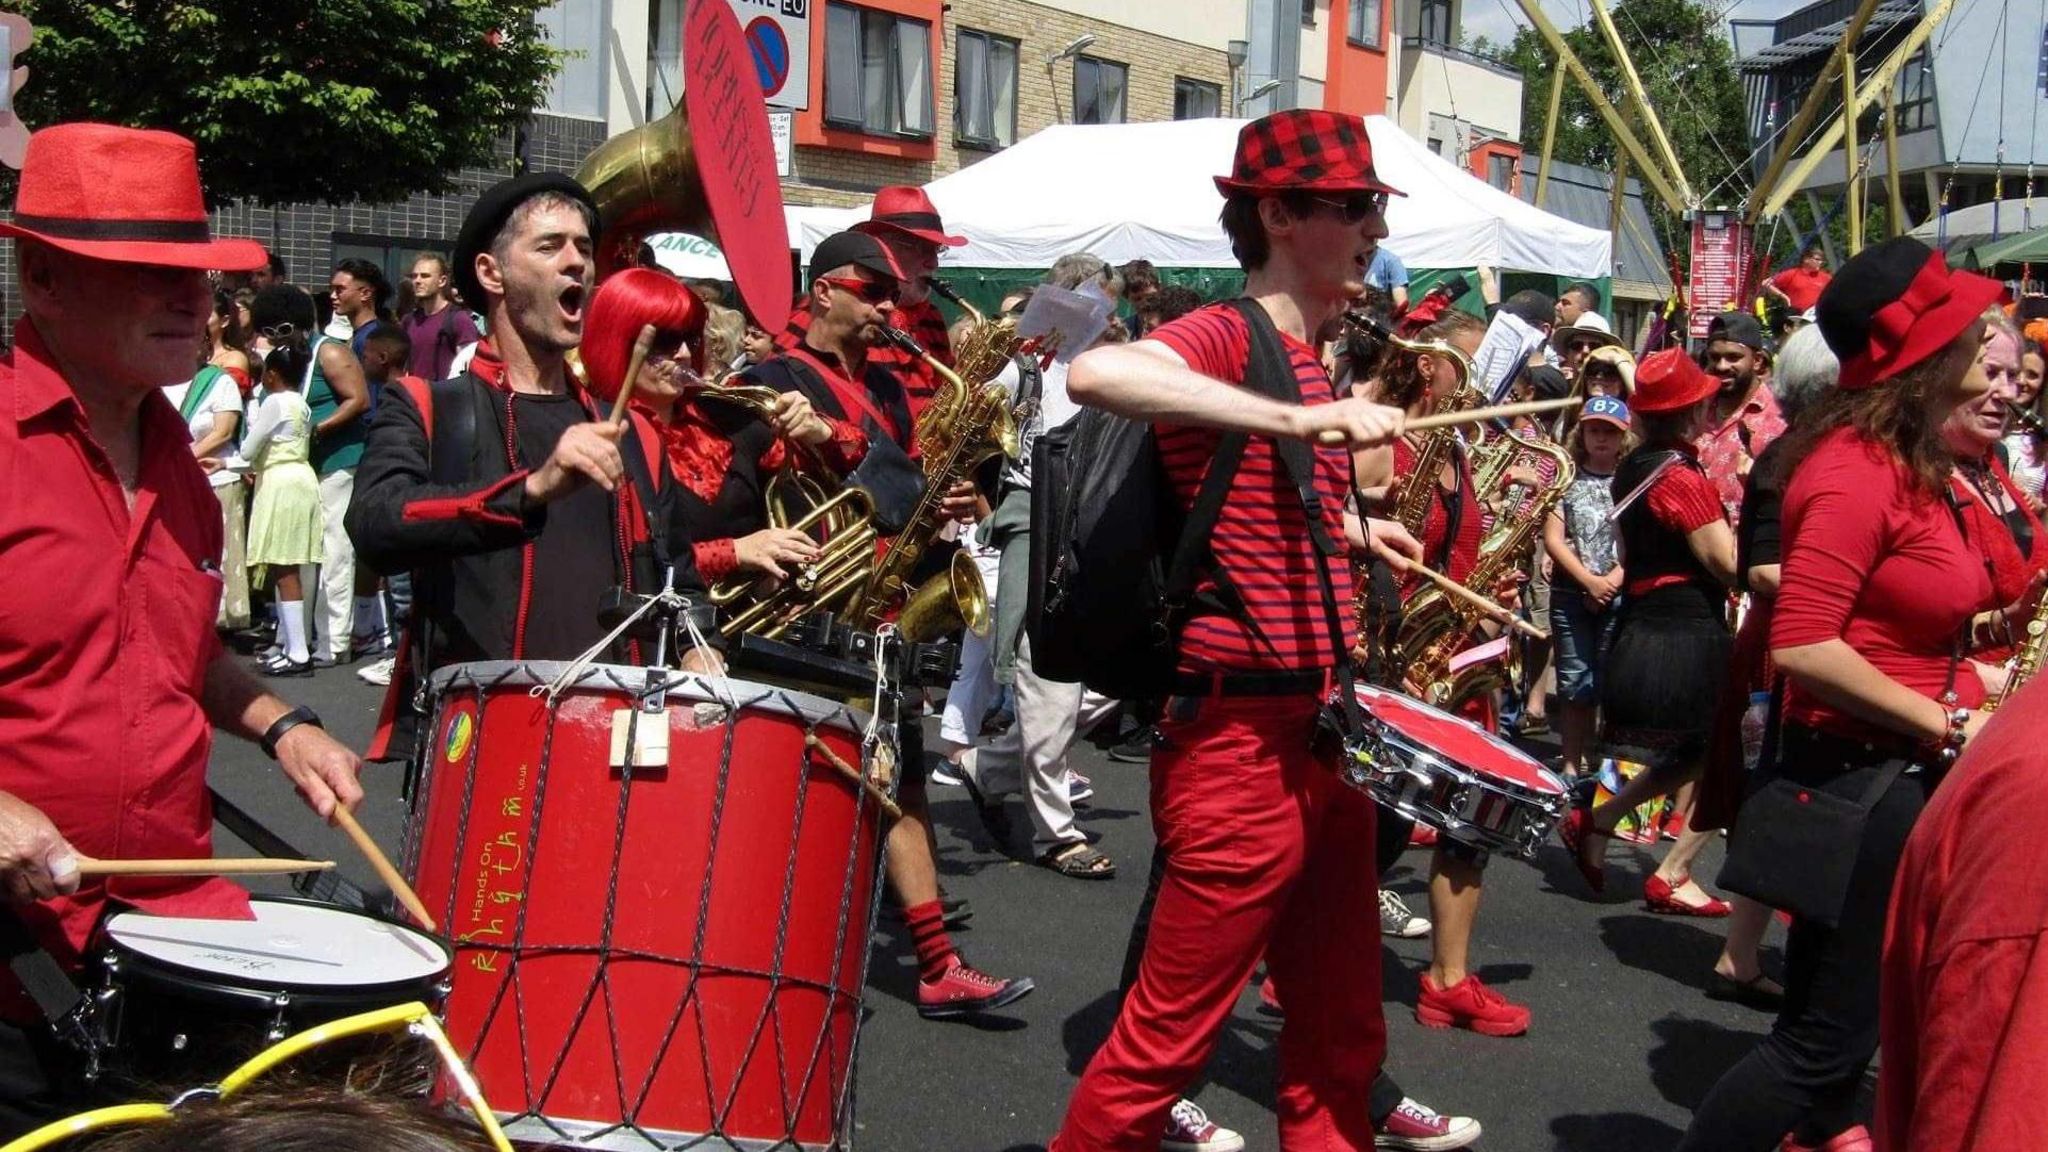 A steelband dressed in black and red playing instruments in the street